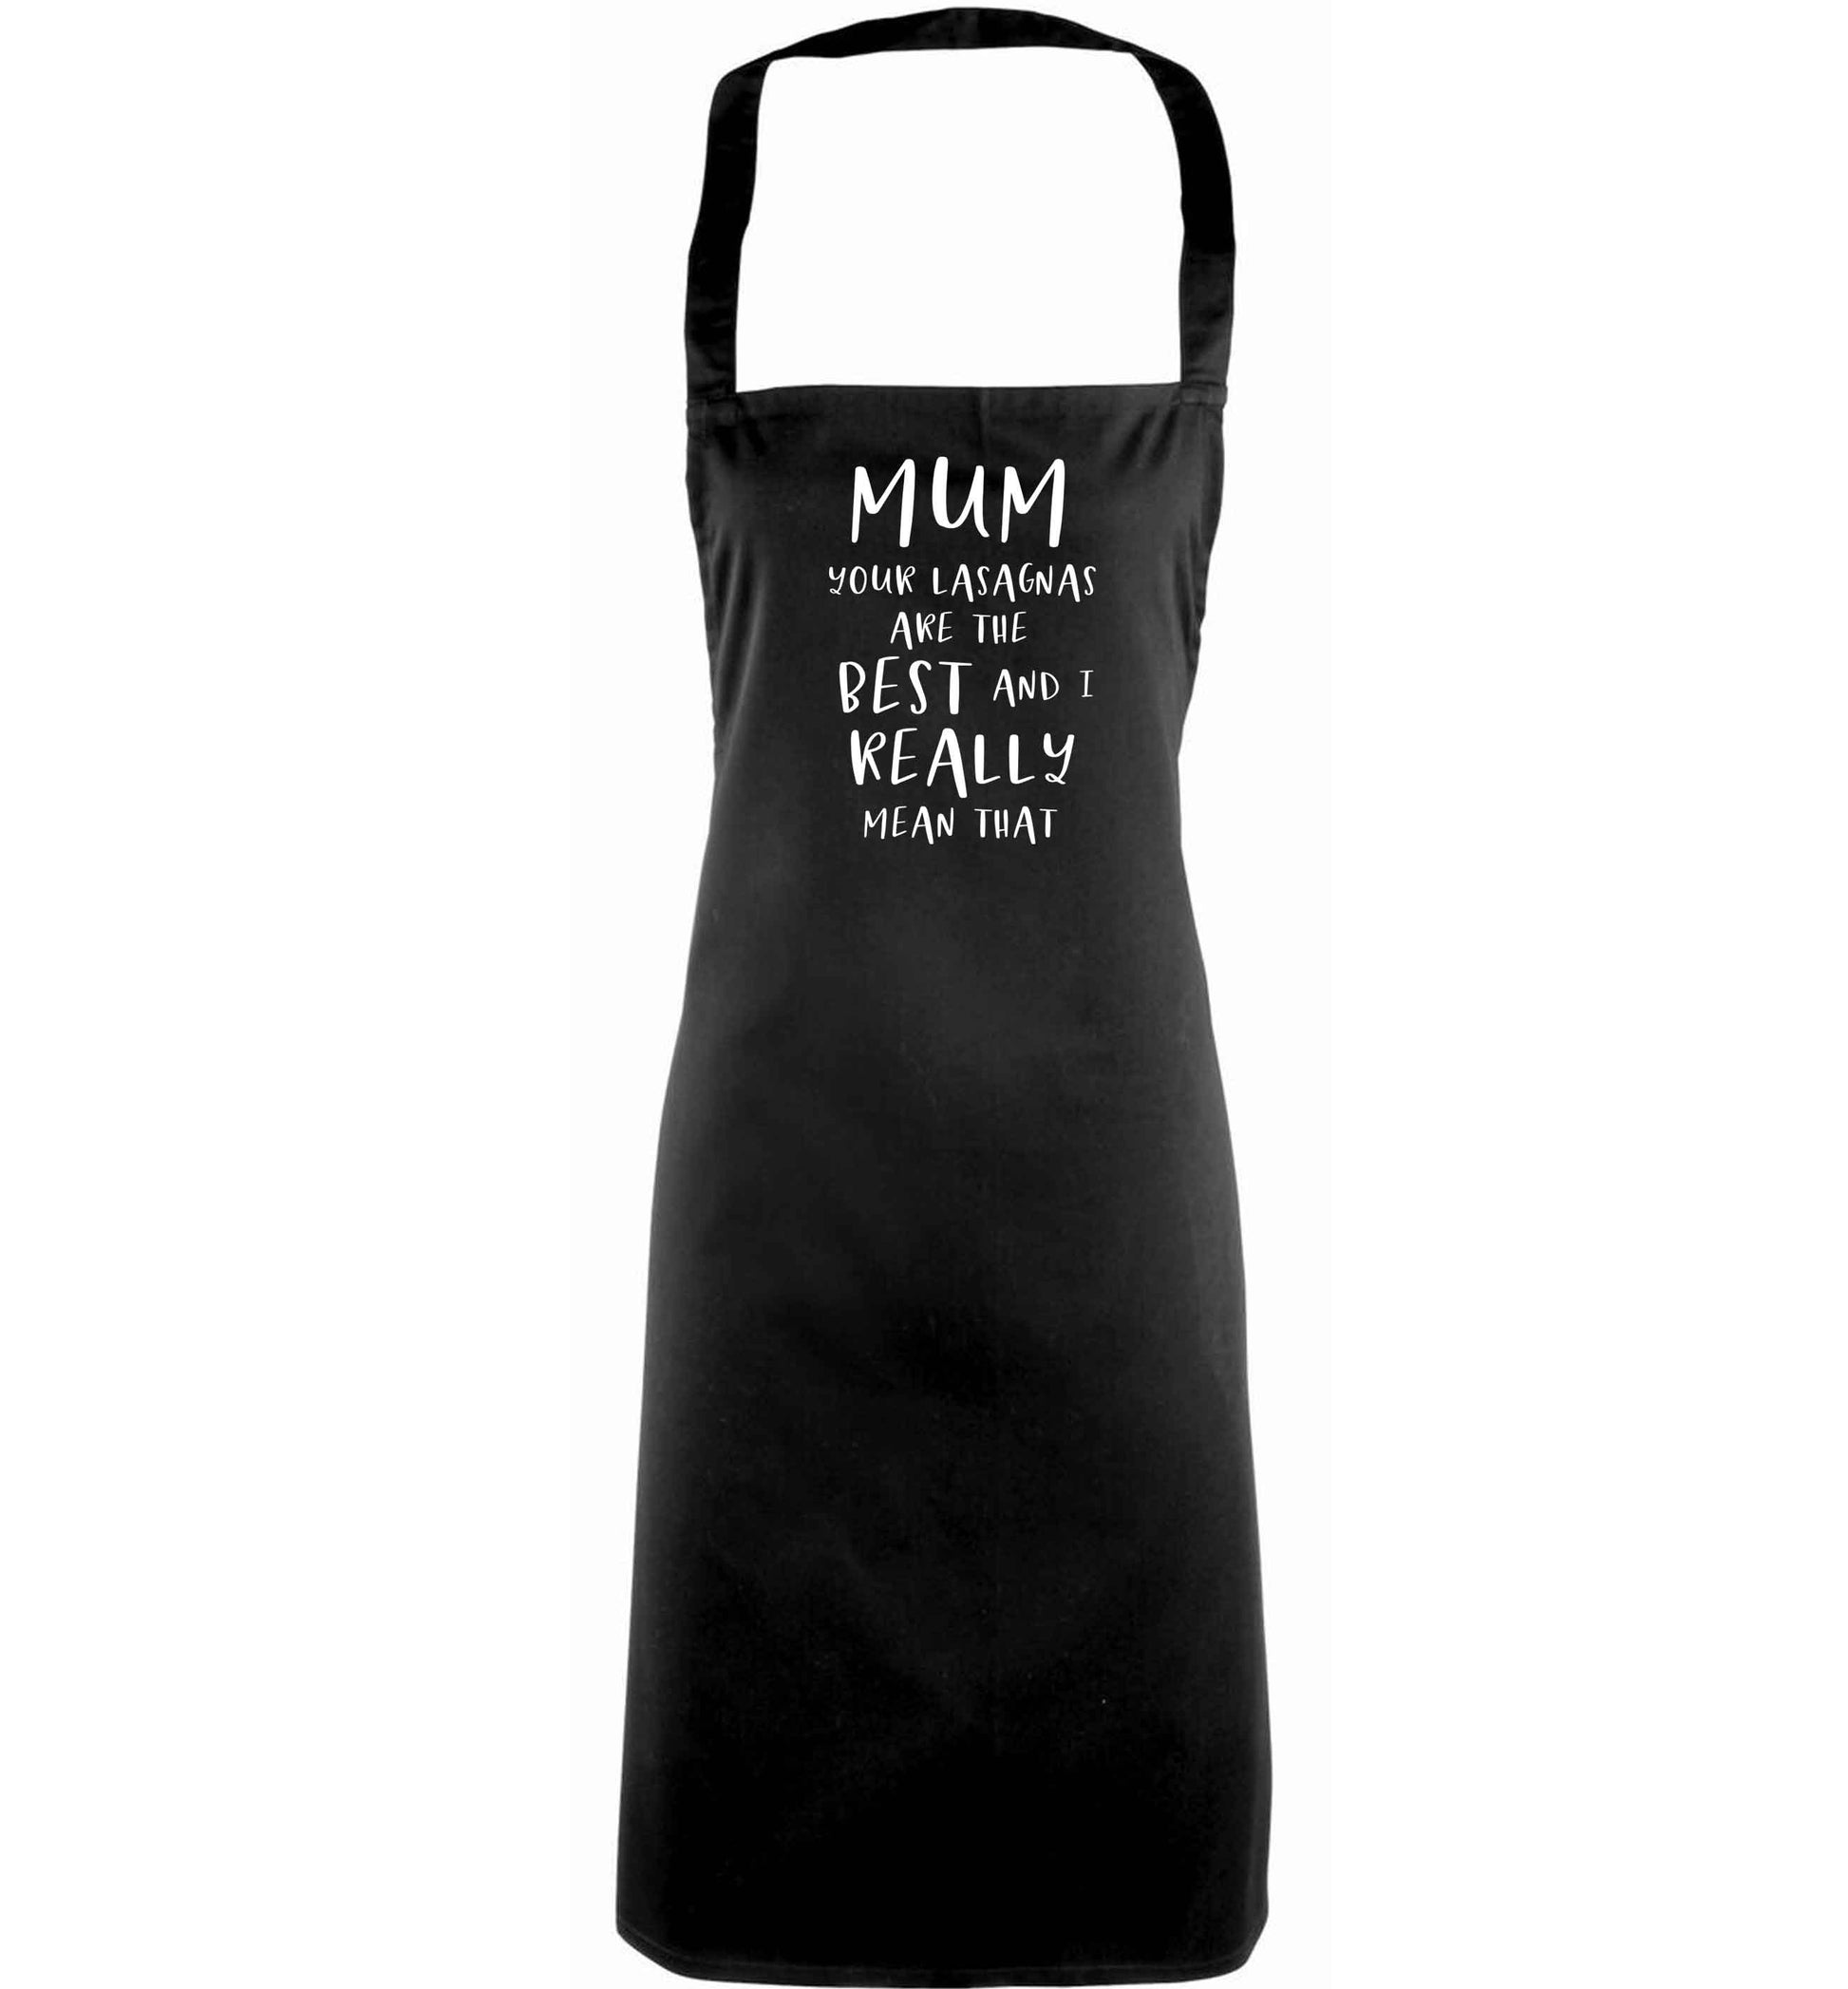 Funny gifts for your mum on mother's dayor her birthday! Mum your lasagnas are the best and I really mean that adults black apron